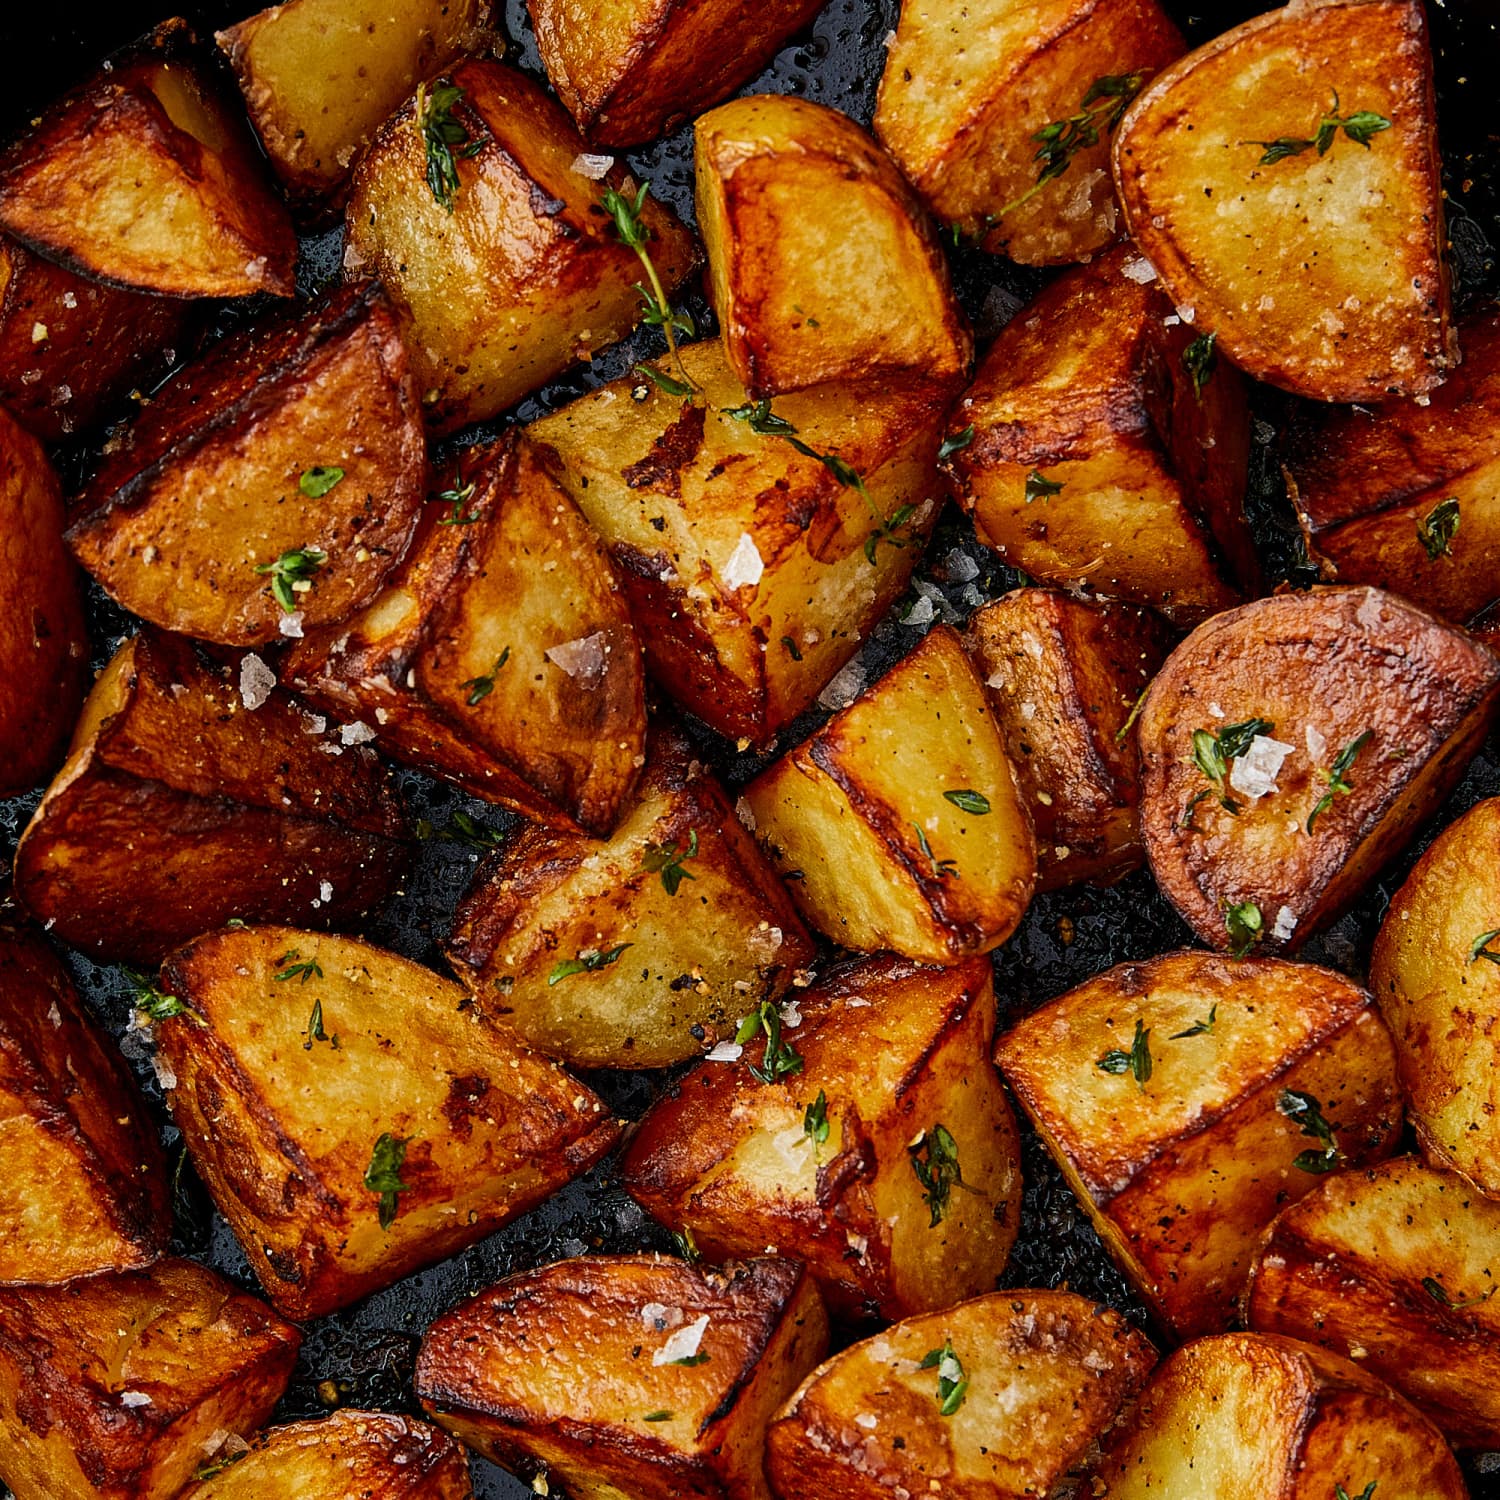 Crispy Skillet-Fried Potatoes (No Baking Or Boiling Required) | The Kitchn